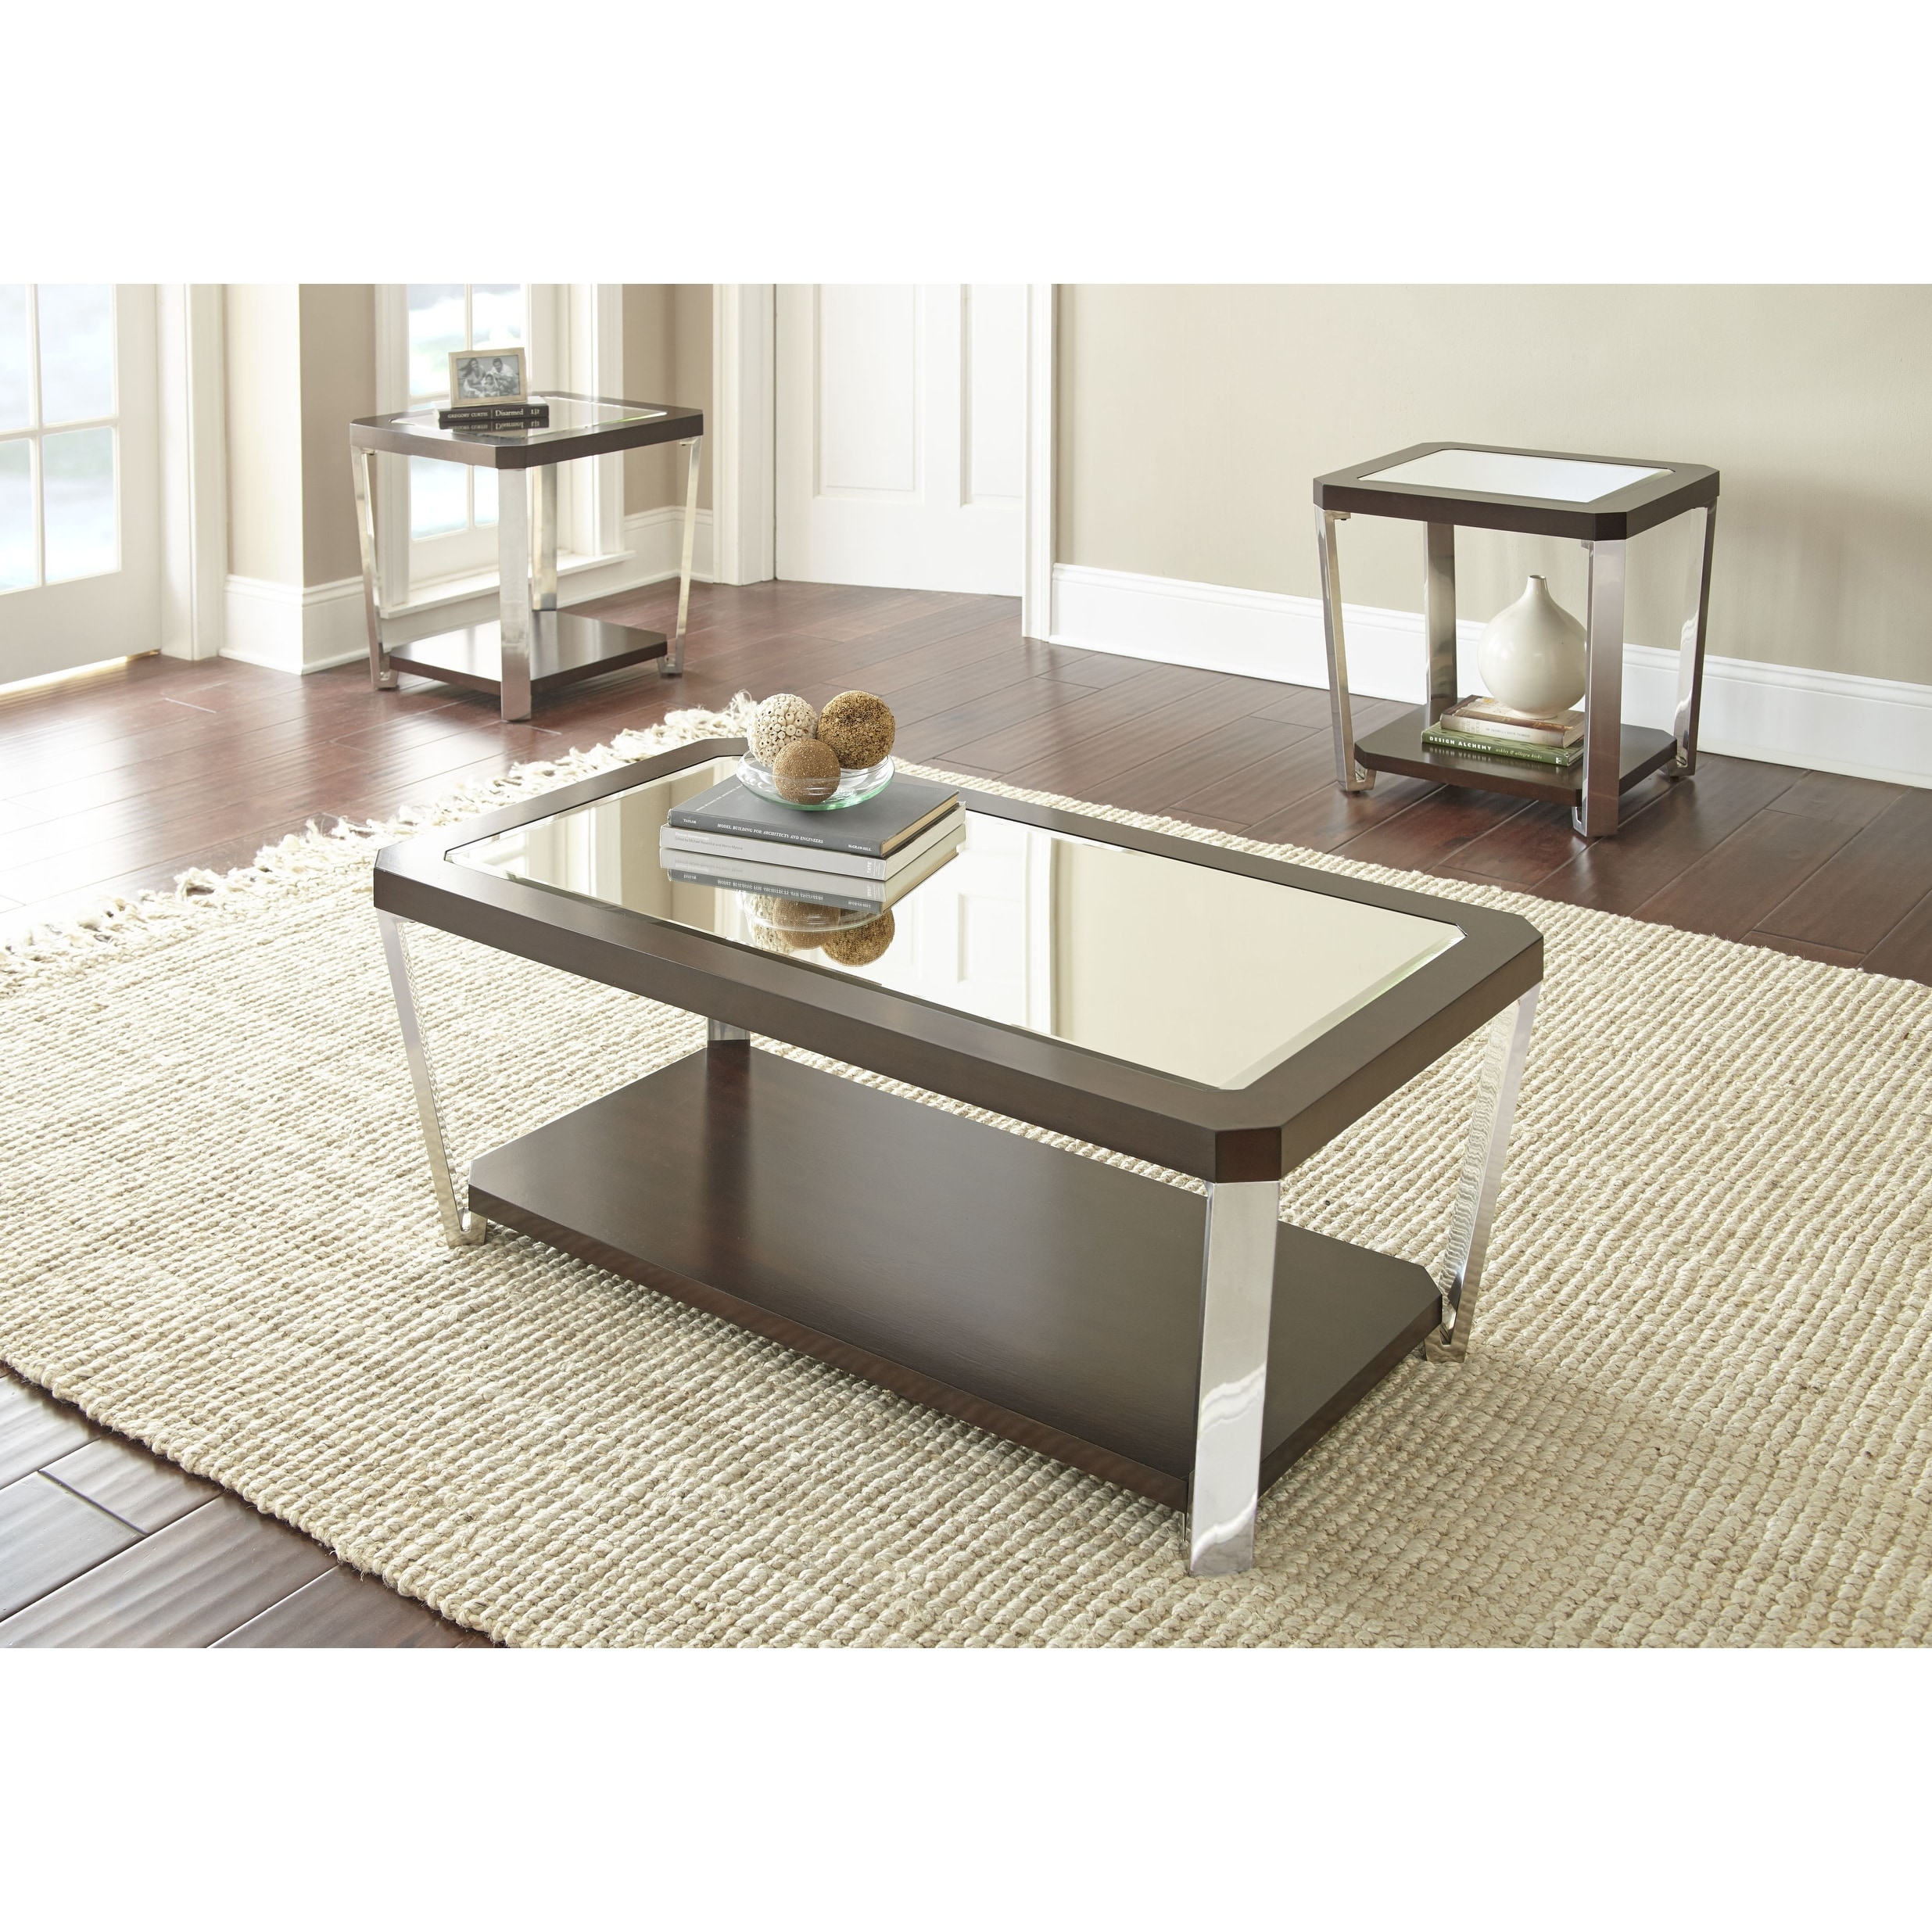 New Mirrored Coffee Cocktail Table Silver Finish Accent Table With 2 Drawers